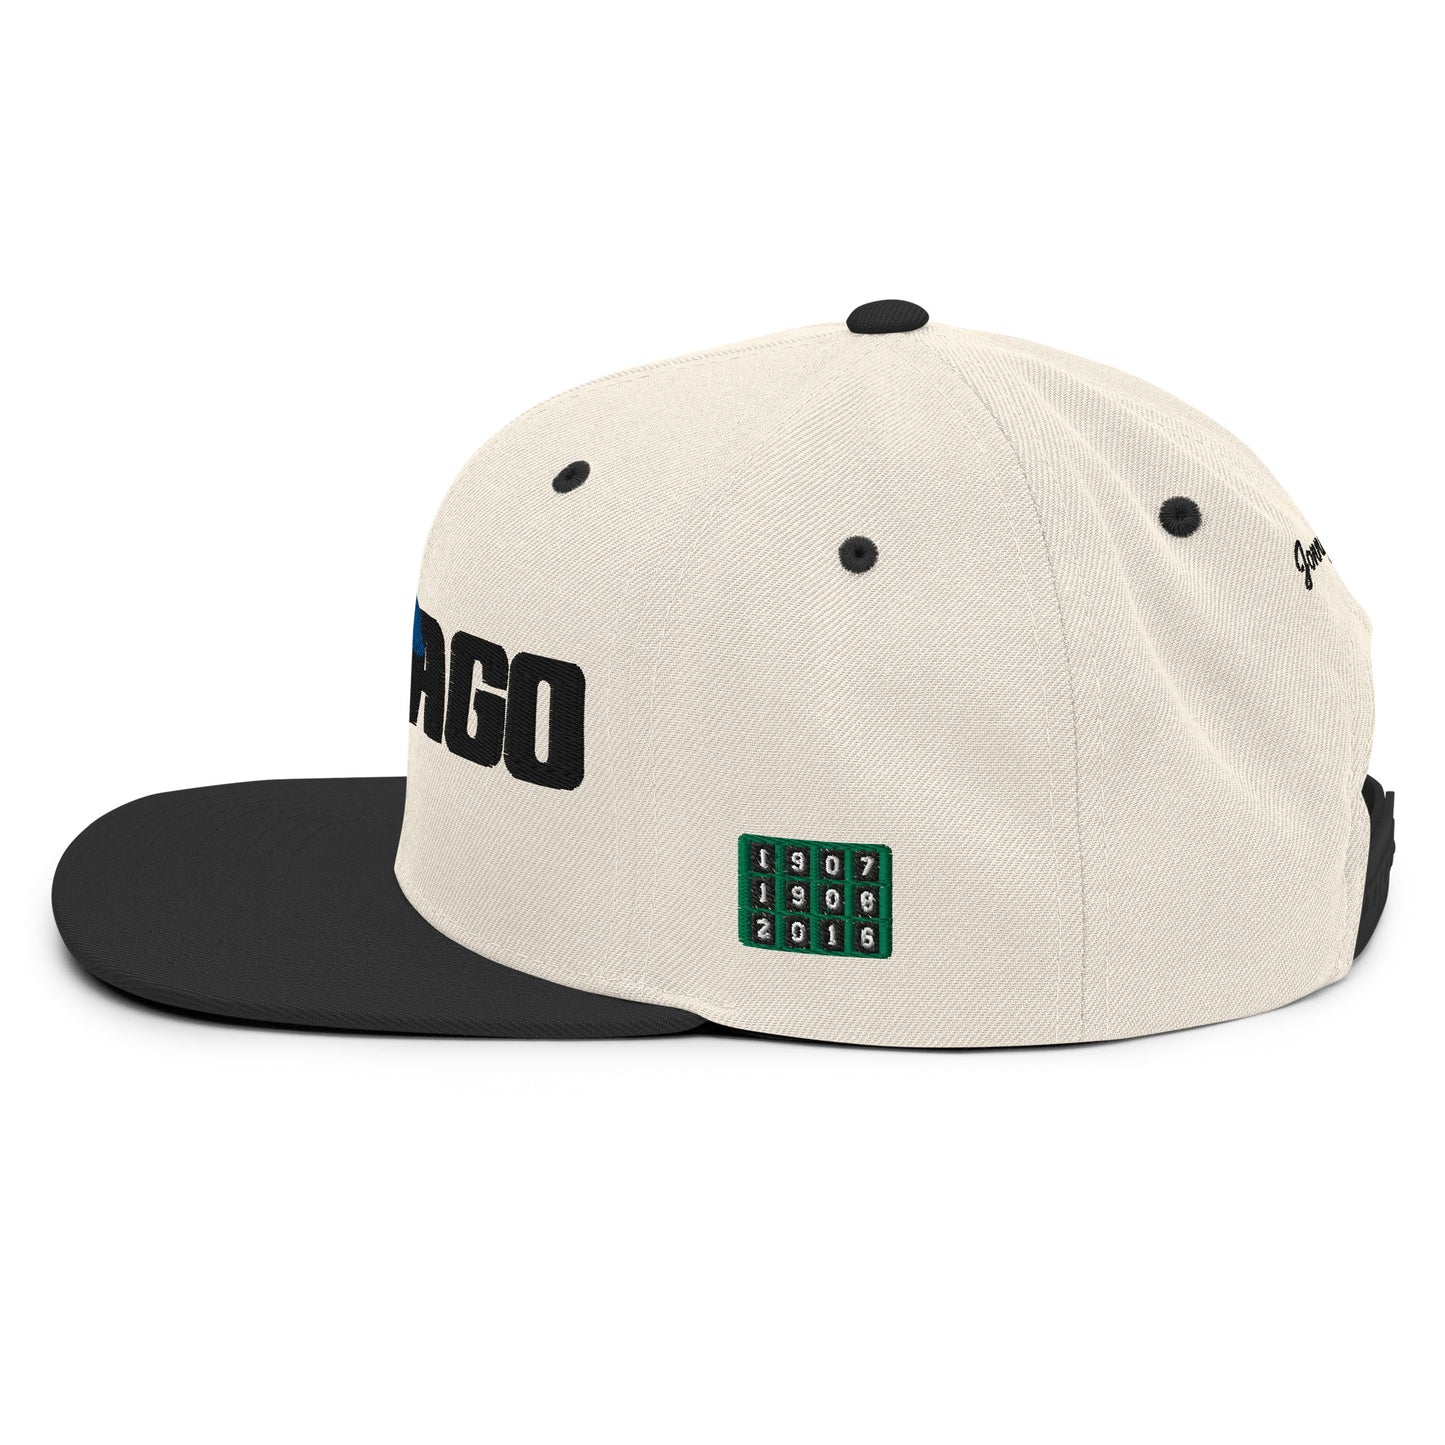 Chicago Cubs - Championship Edition (Natural/Black)